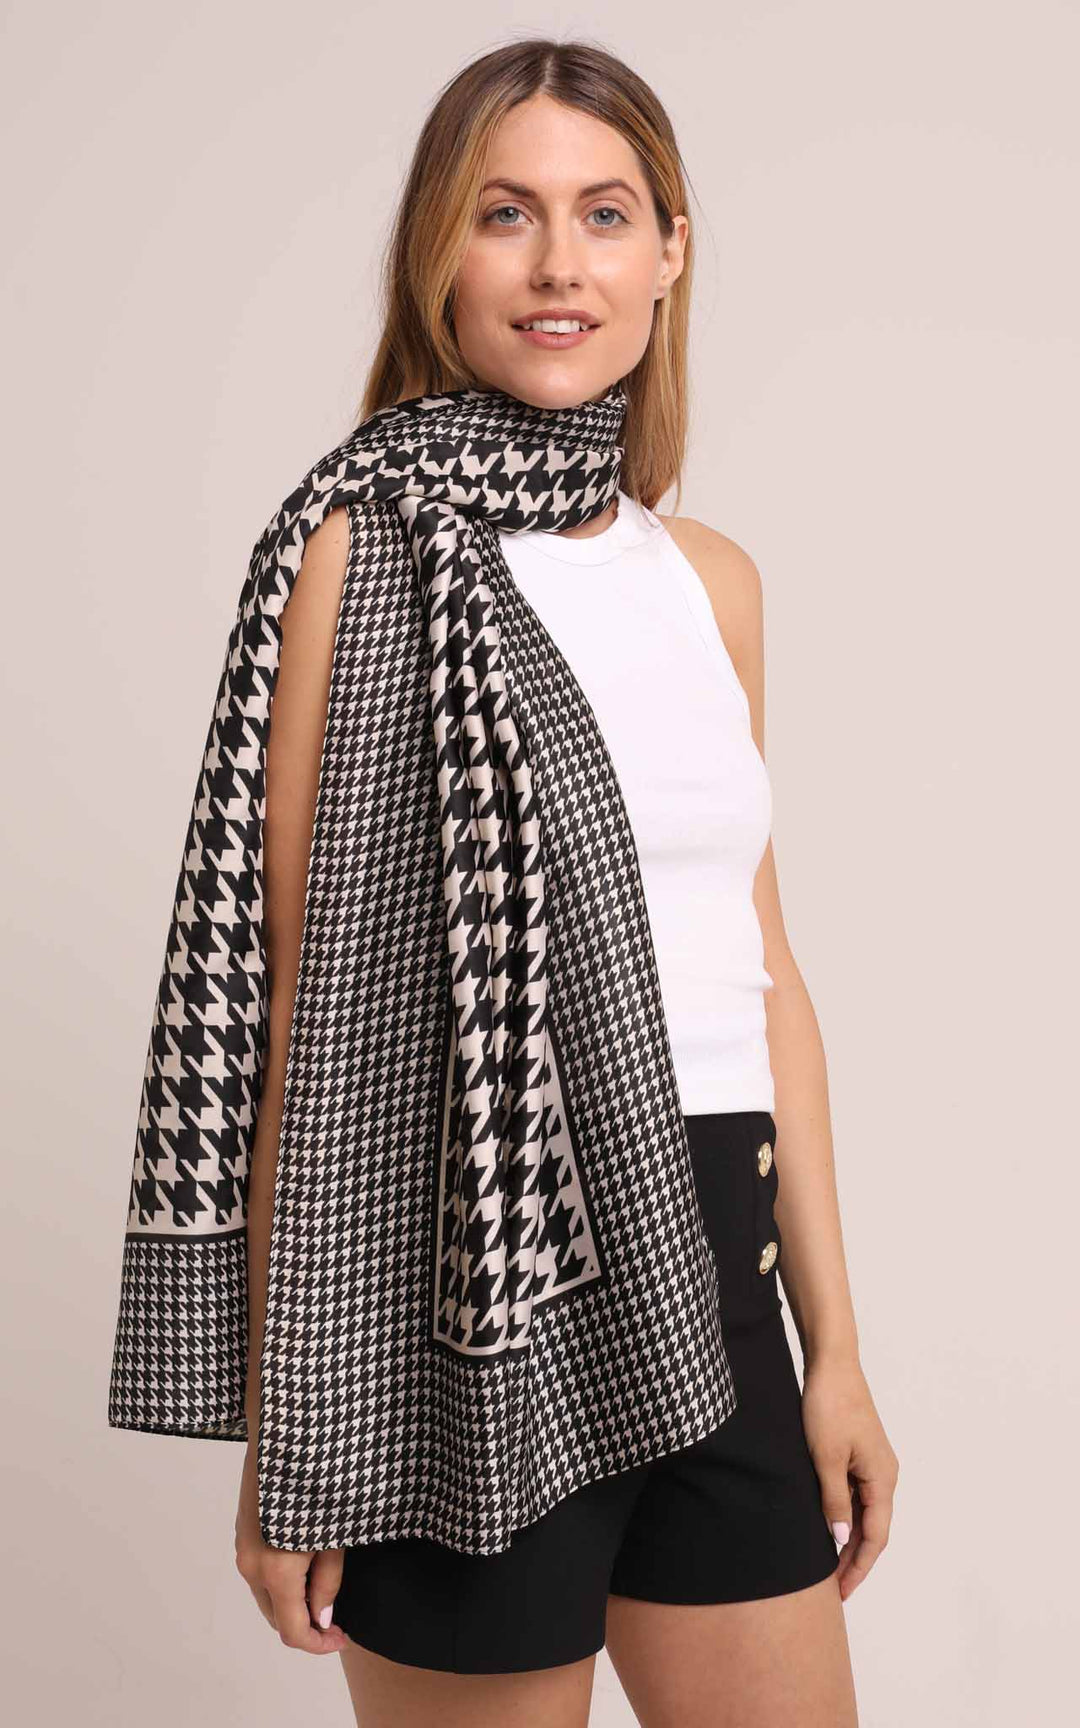 Silk Scarf in Black and White Houndstooth Print